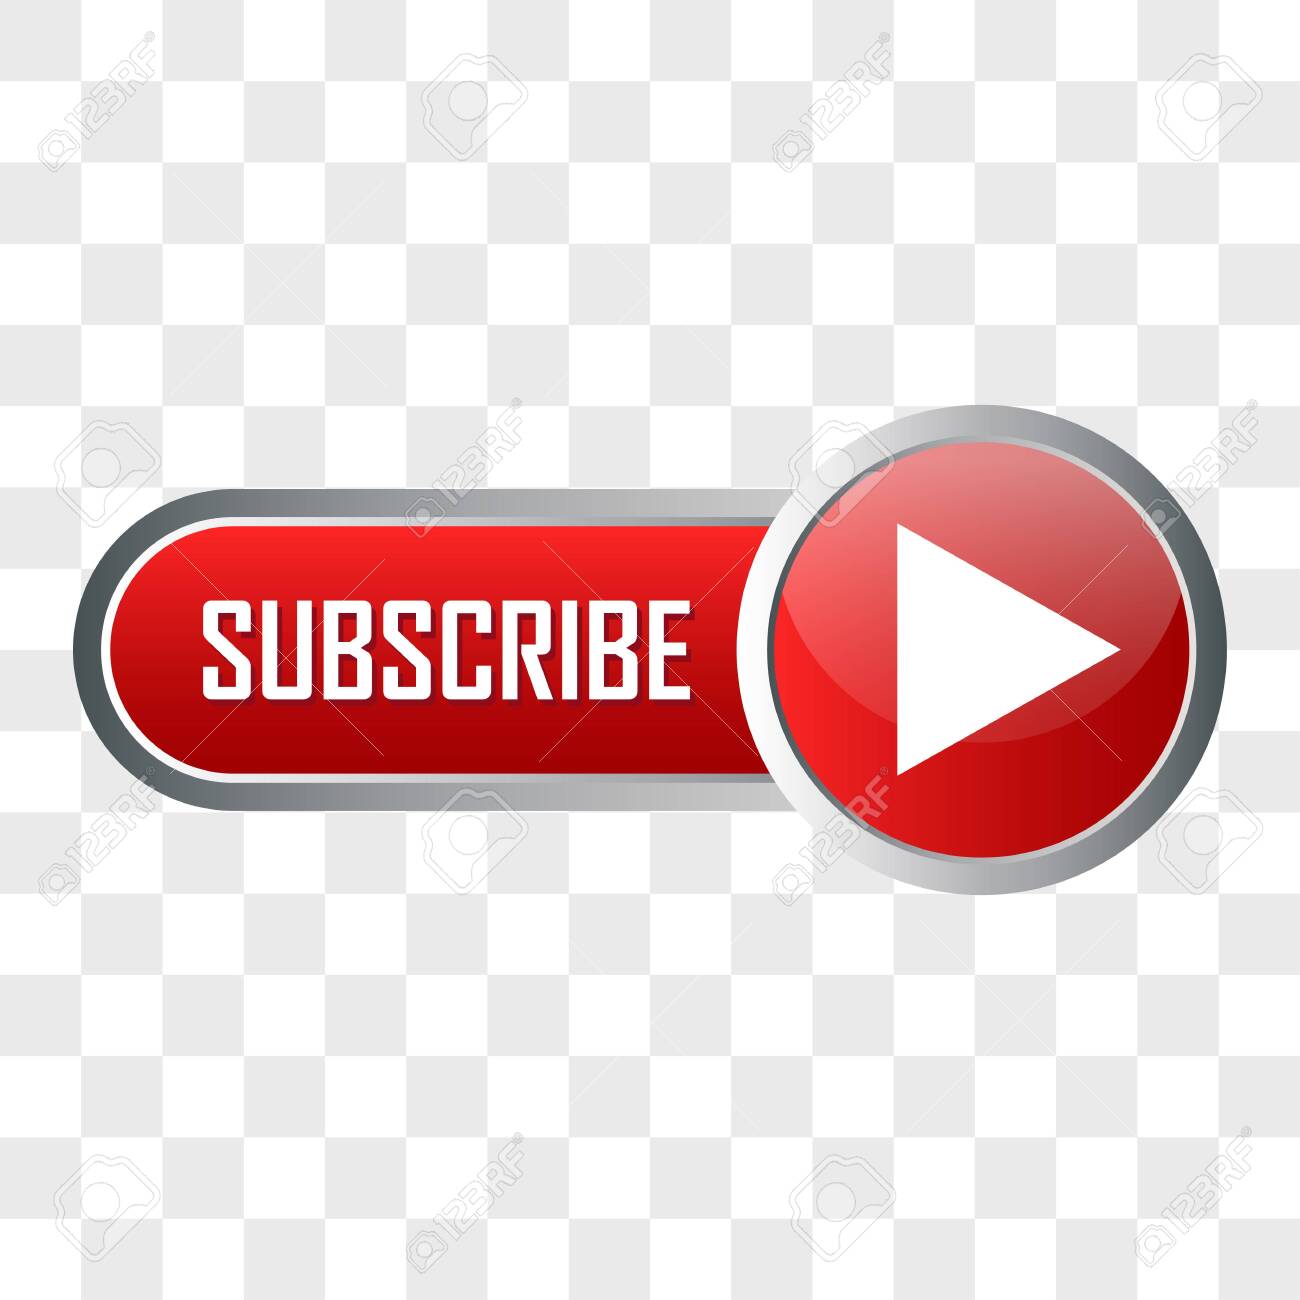 Subscribe Now Button For Social Media Or Business Concept On